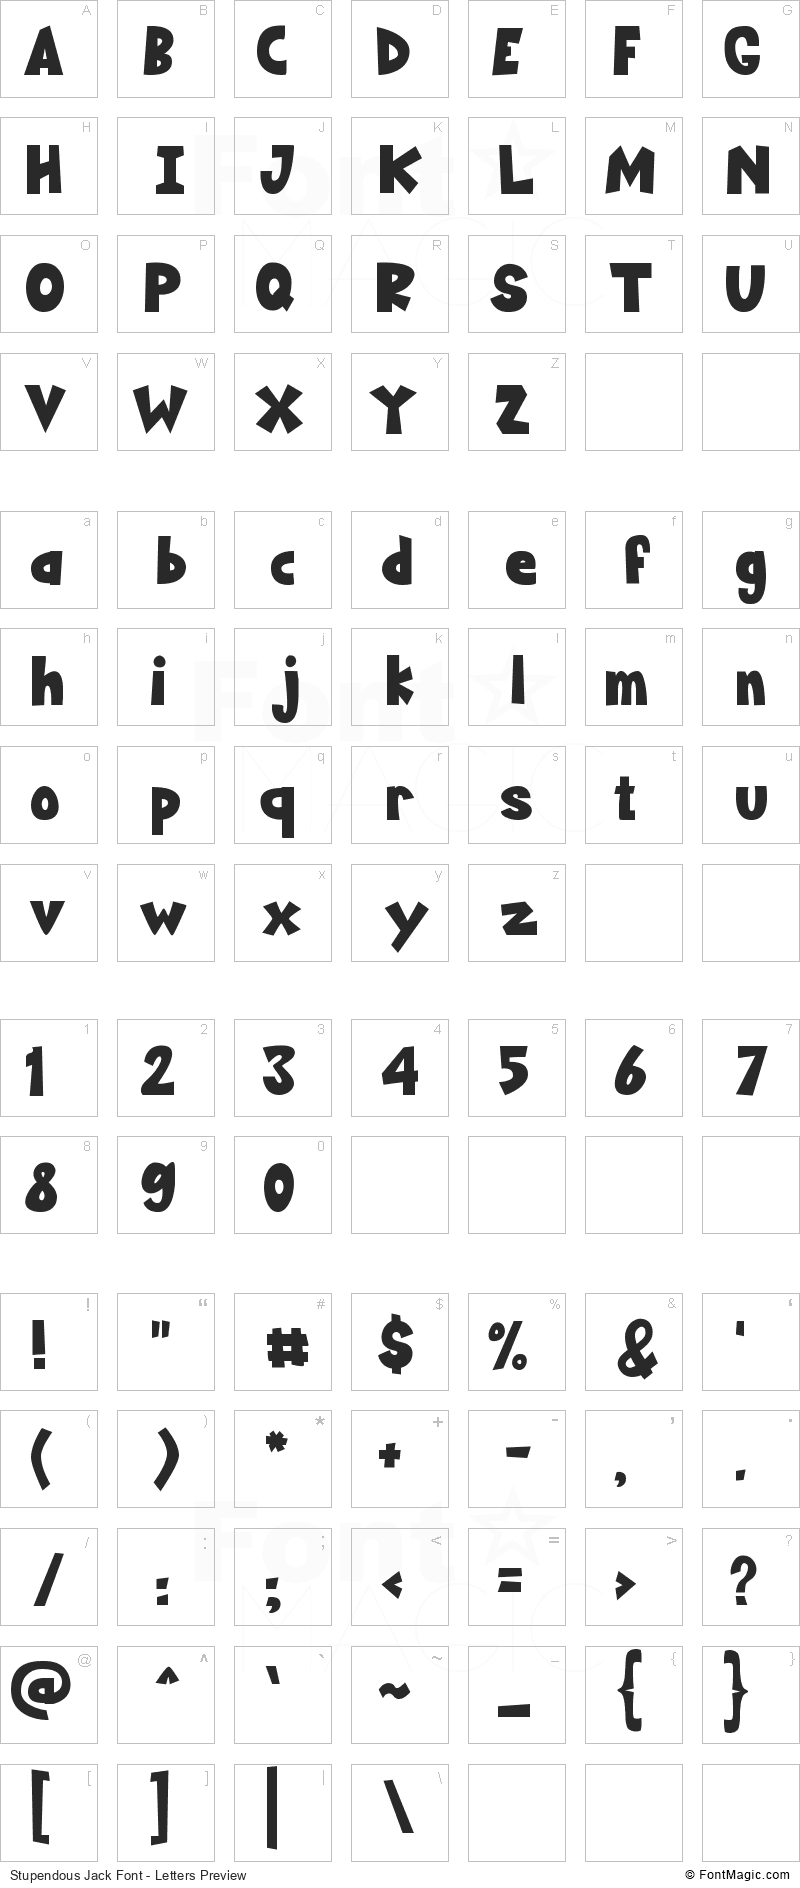 Stupendous Jack Font - All Latters Preview Chart